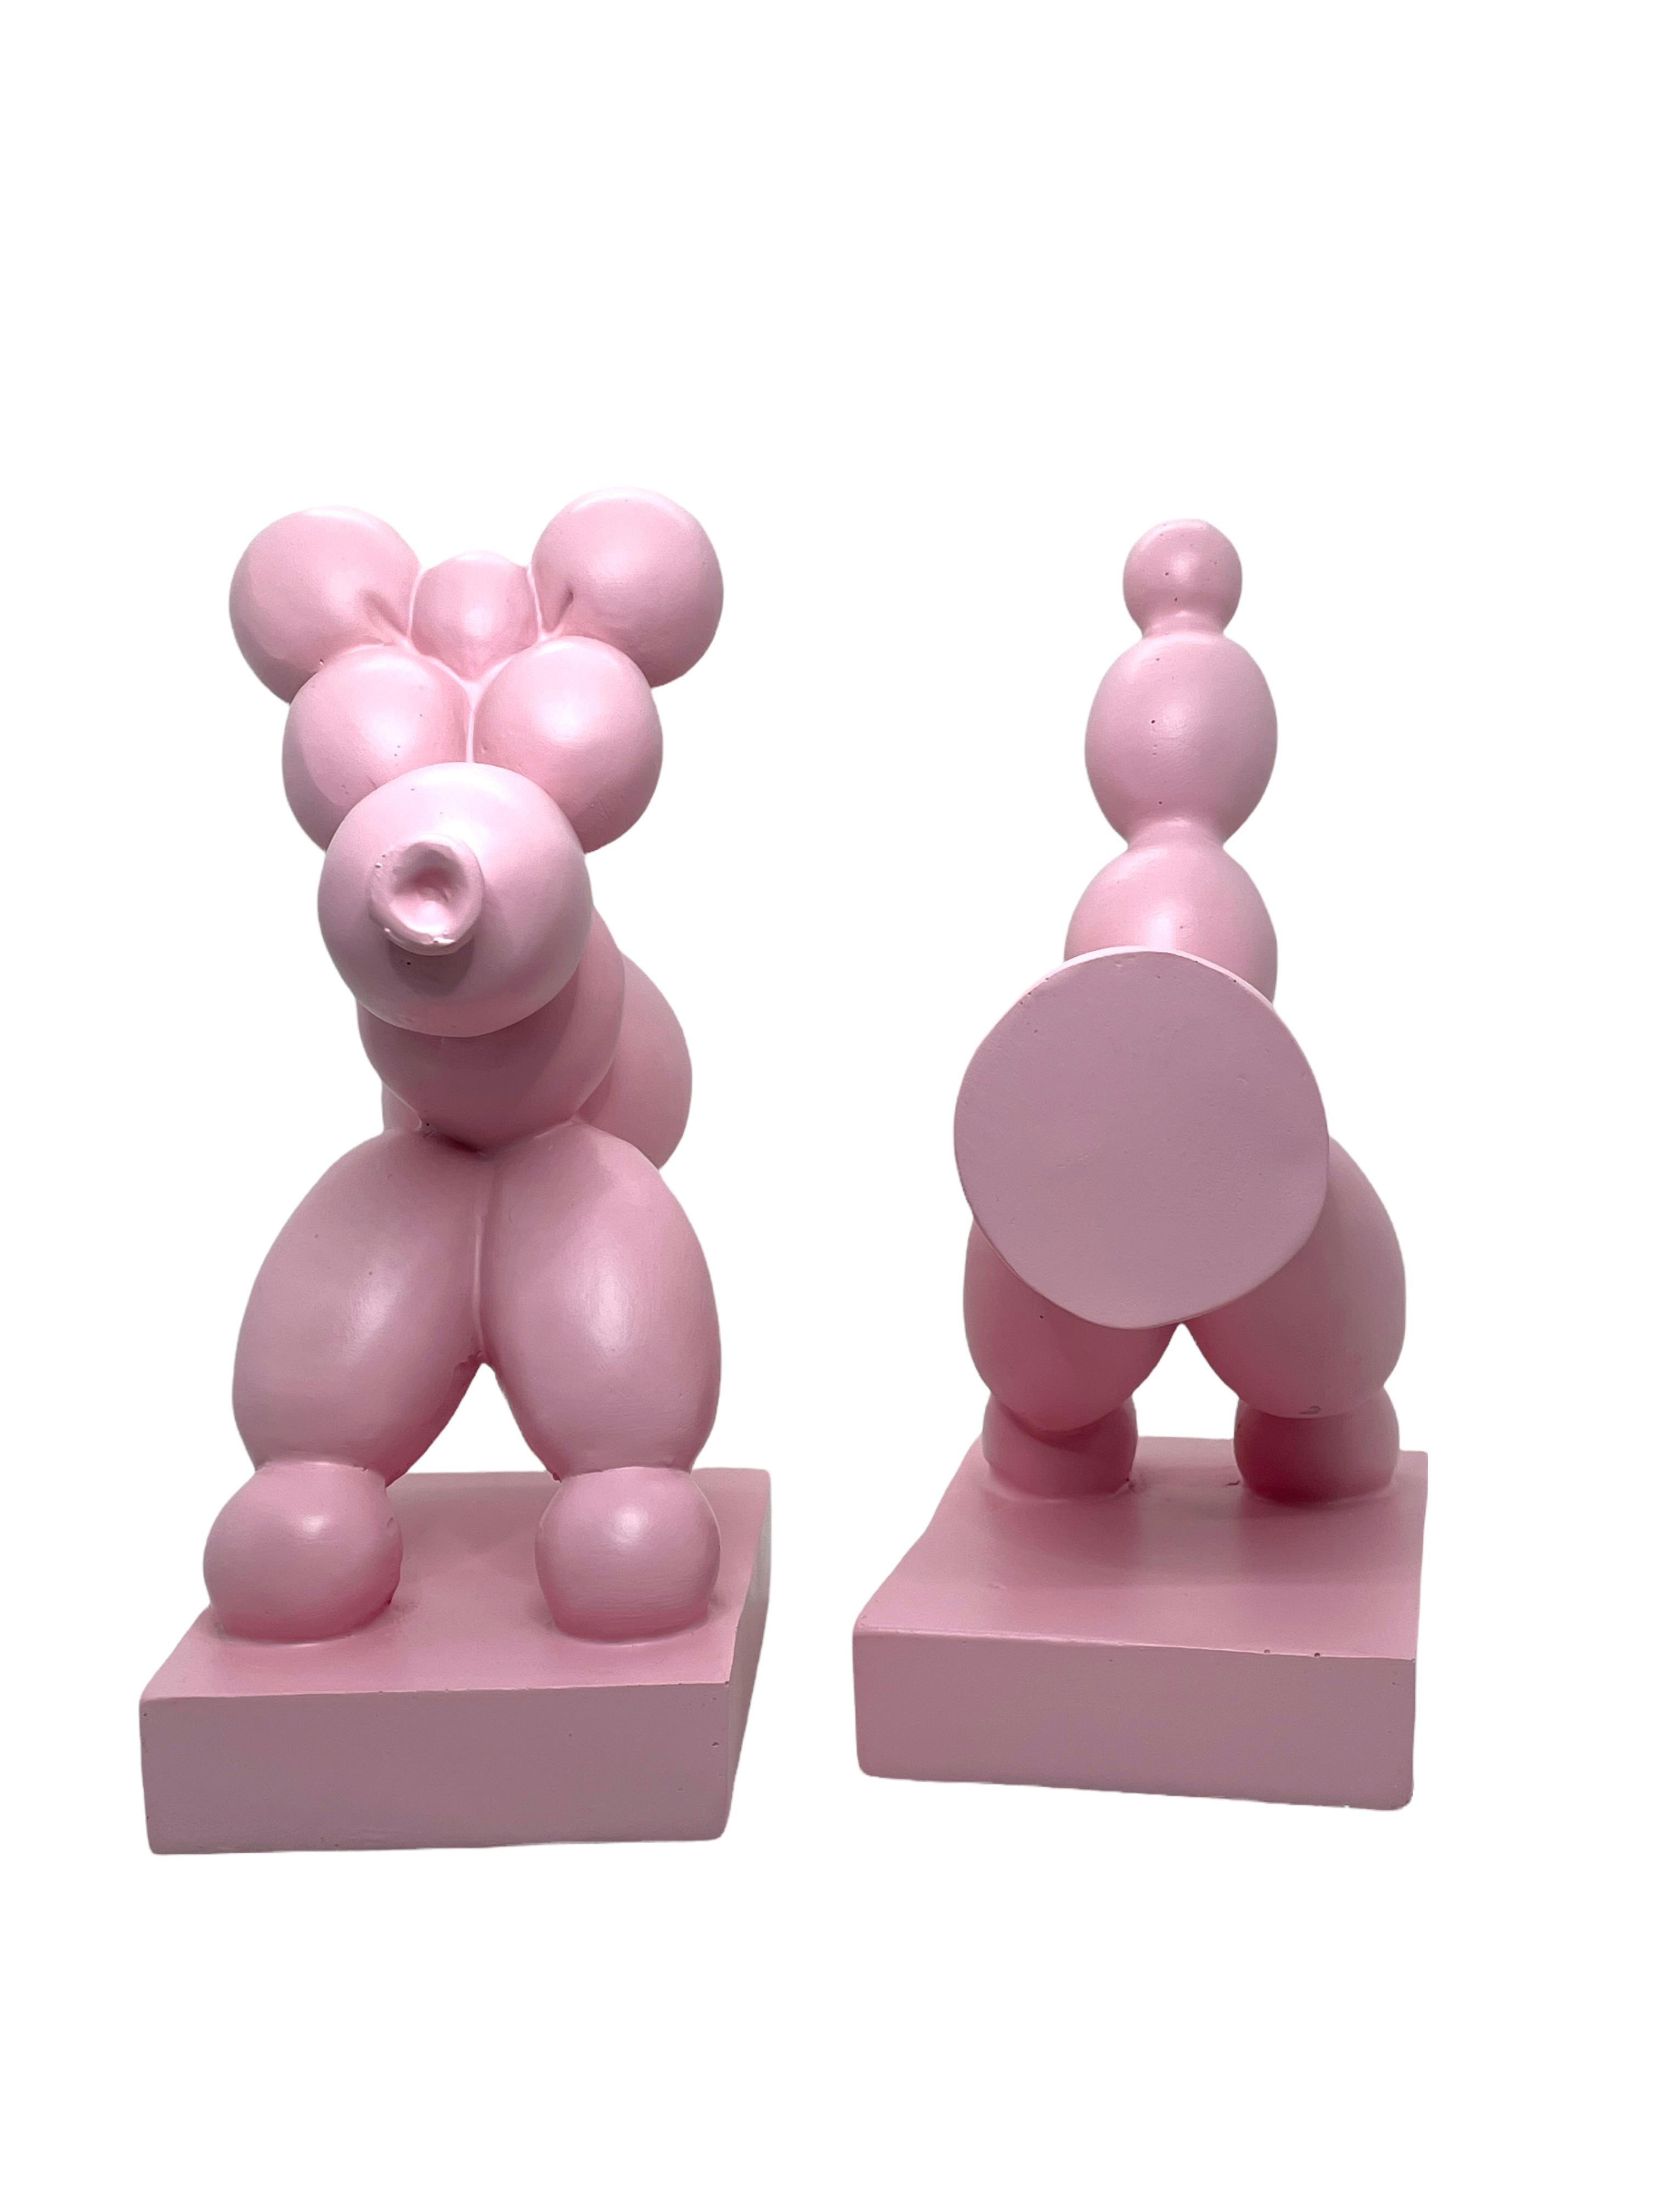 A pink colored Balloon Dog sculpture book end or decorative object. It is a bookend consisting of 2 parts, a front and a back part. Nice addition to any room, but very nice to see in your girls room. Found at an estate sale in Utrecht, Netherlands.